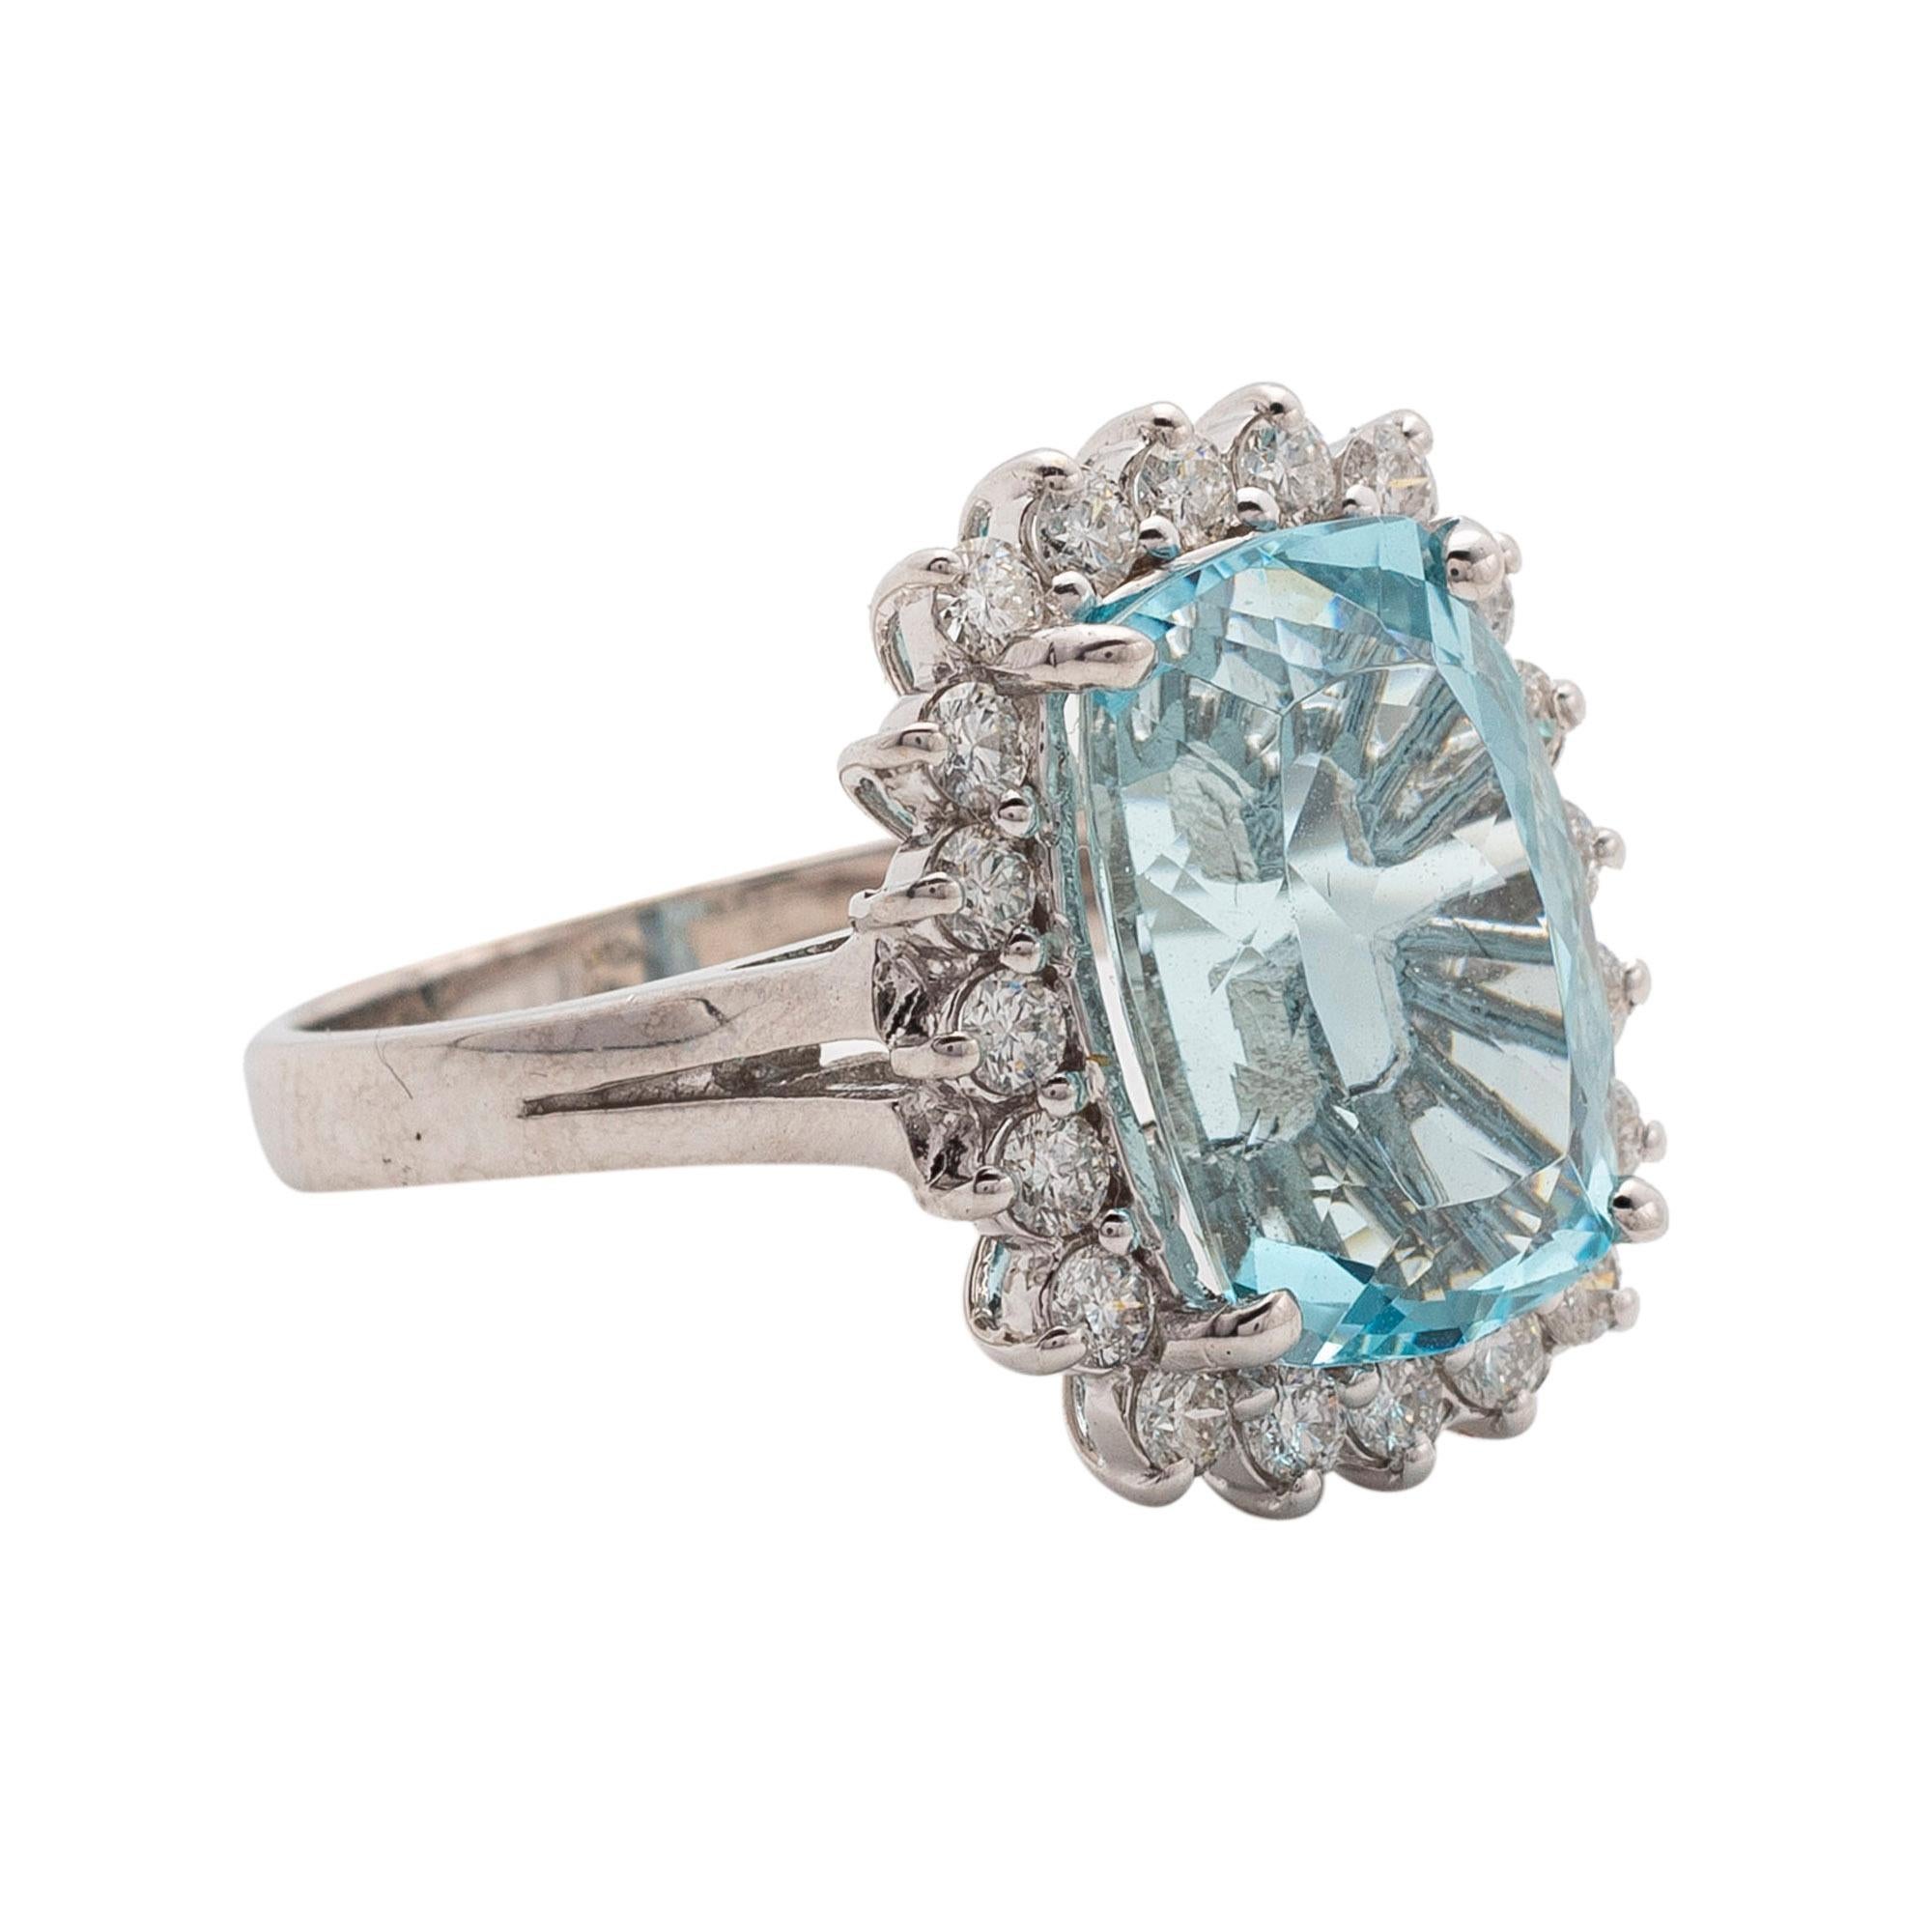 Aquamarine and Diamond Ring
Claw-set with a rectangular step-cut aquamarine weighing approximately 5.76 carats, within a surround of brilliant-cut diamonds weighing approximately .65 carats
set in 14 karat white gold,
size 6. 